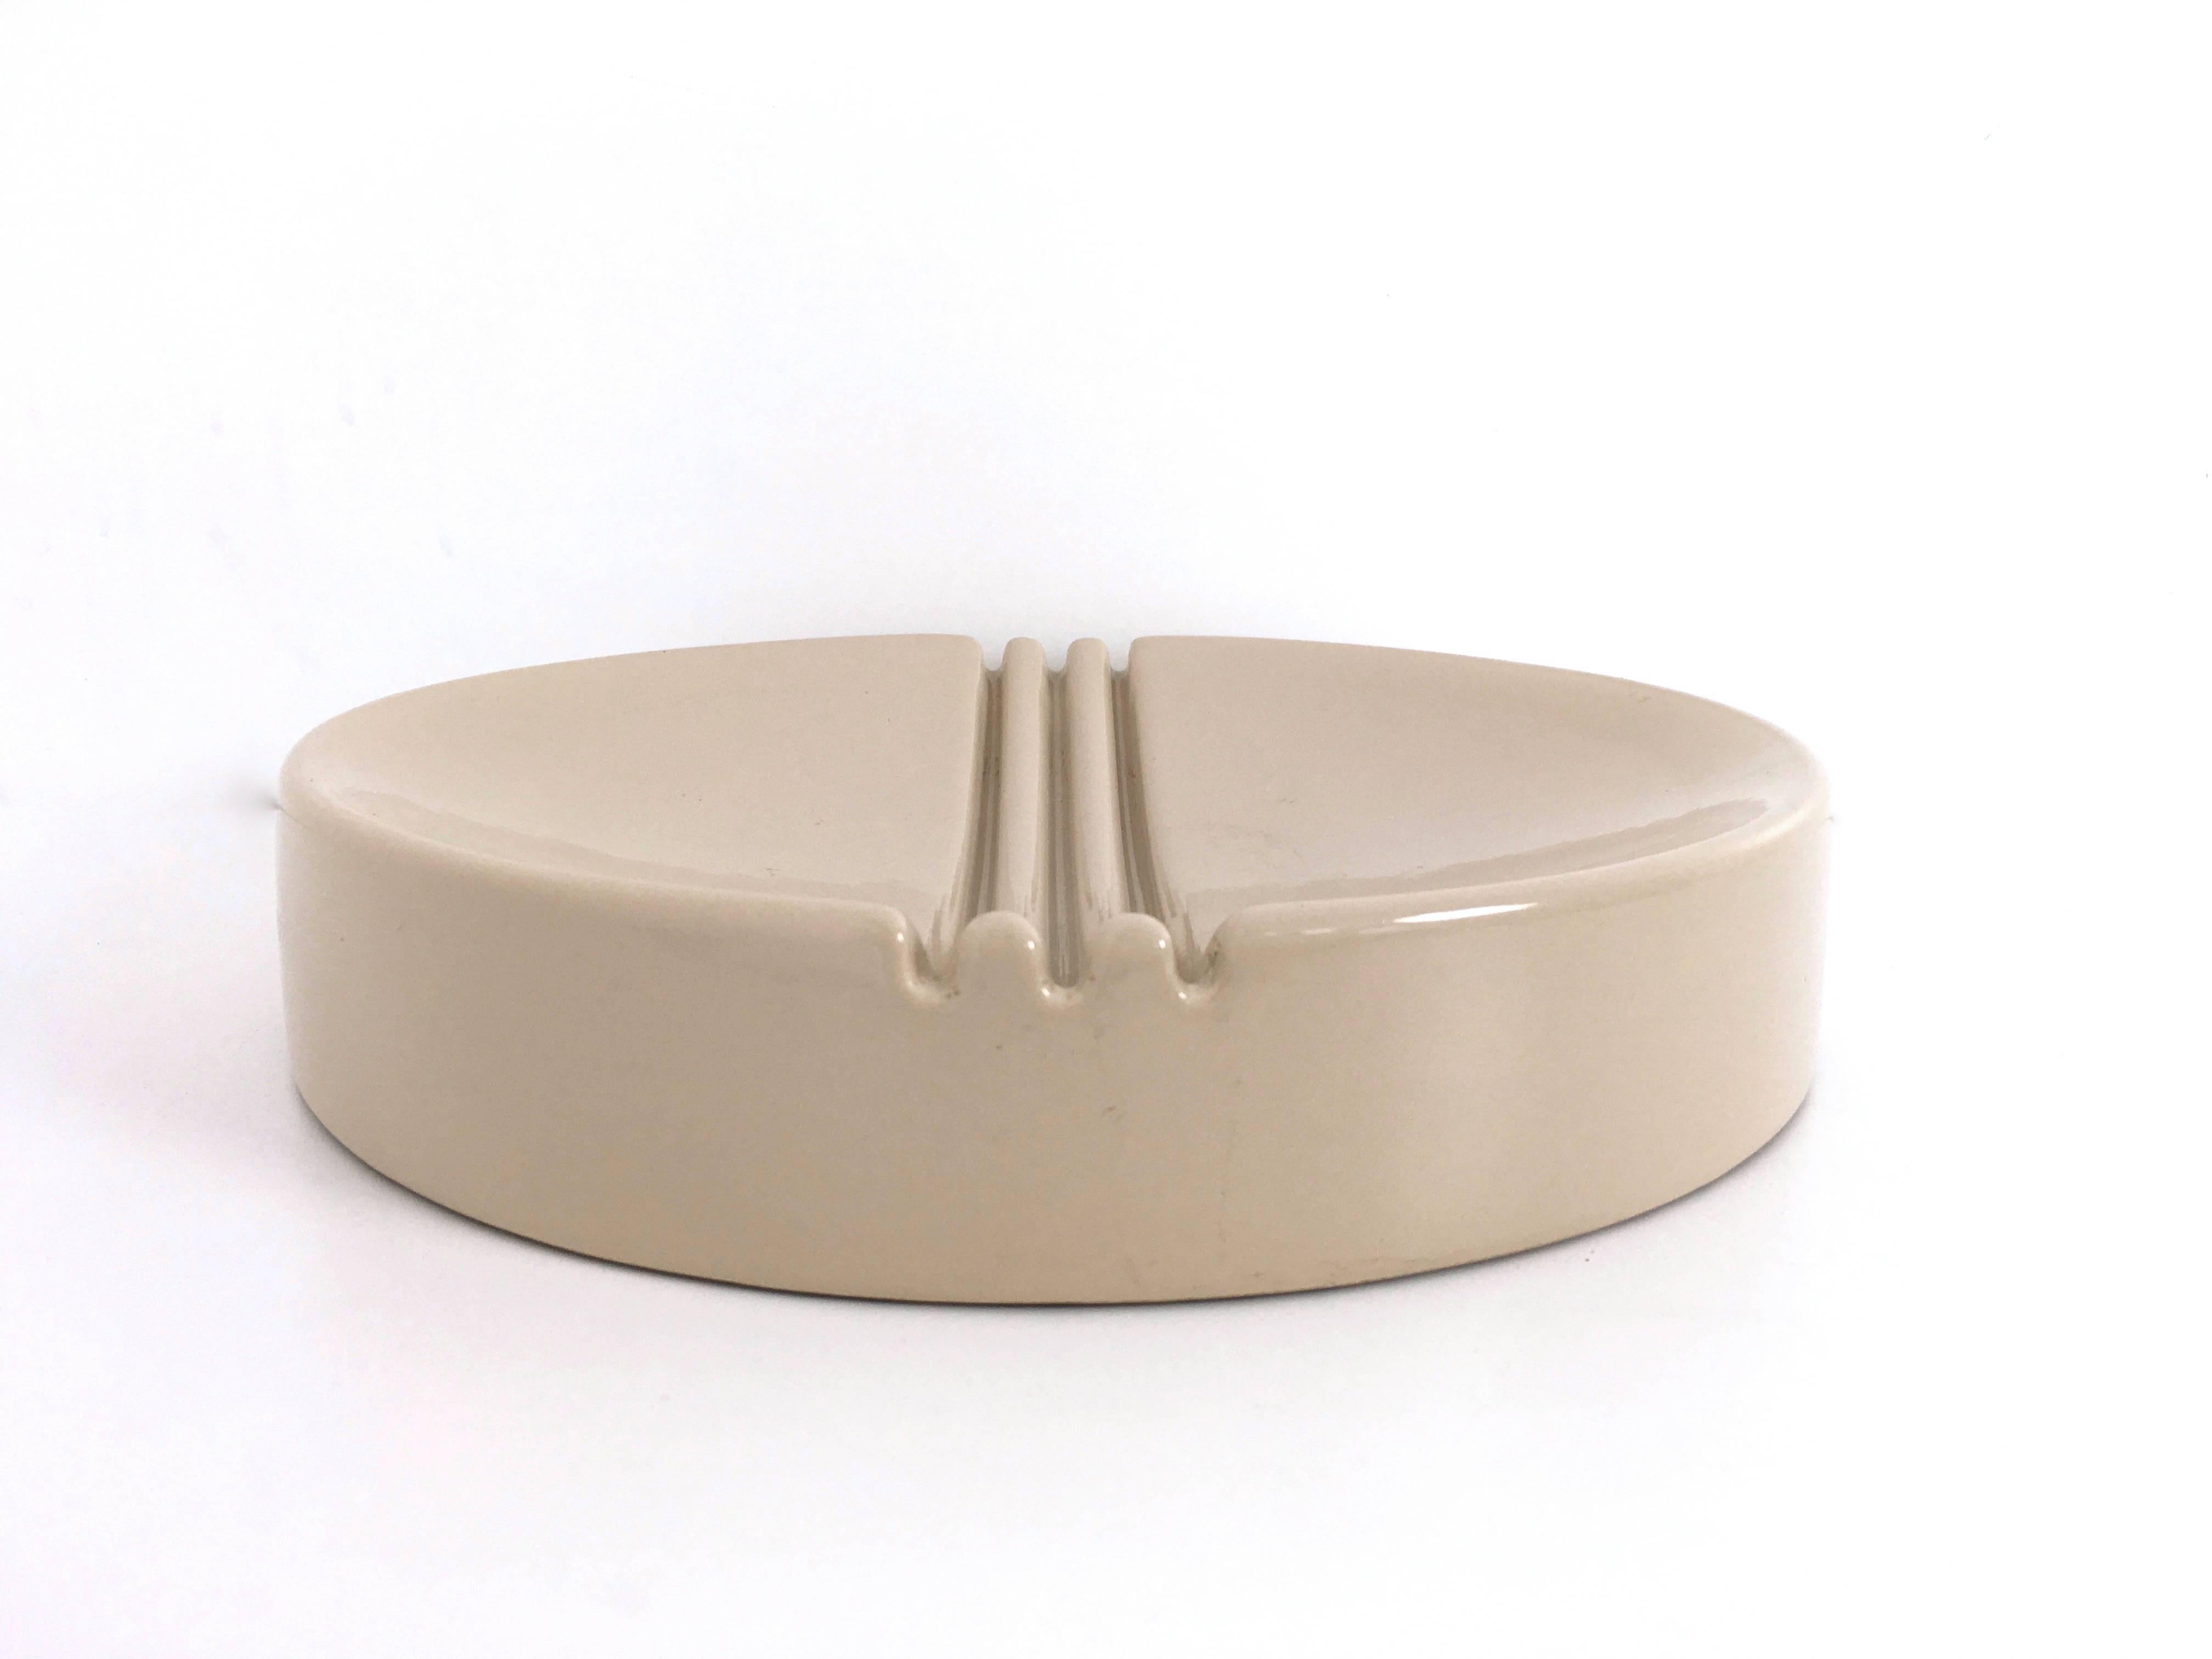 Made in Italy, 1960s. 
This ashtray / catchall is made in ceramic by Giancarlo Gabbianelli and features its original label. 
It may show slight traces of use since it's vintage, but it can be considered as in excellent original condition.

Measures: